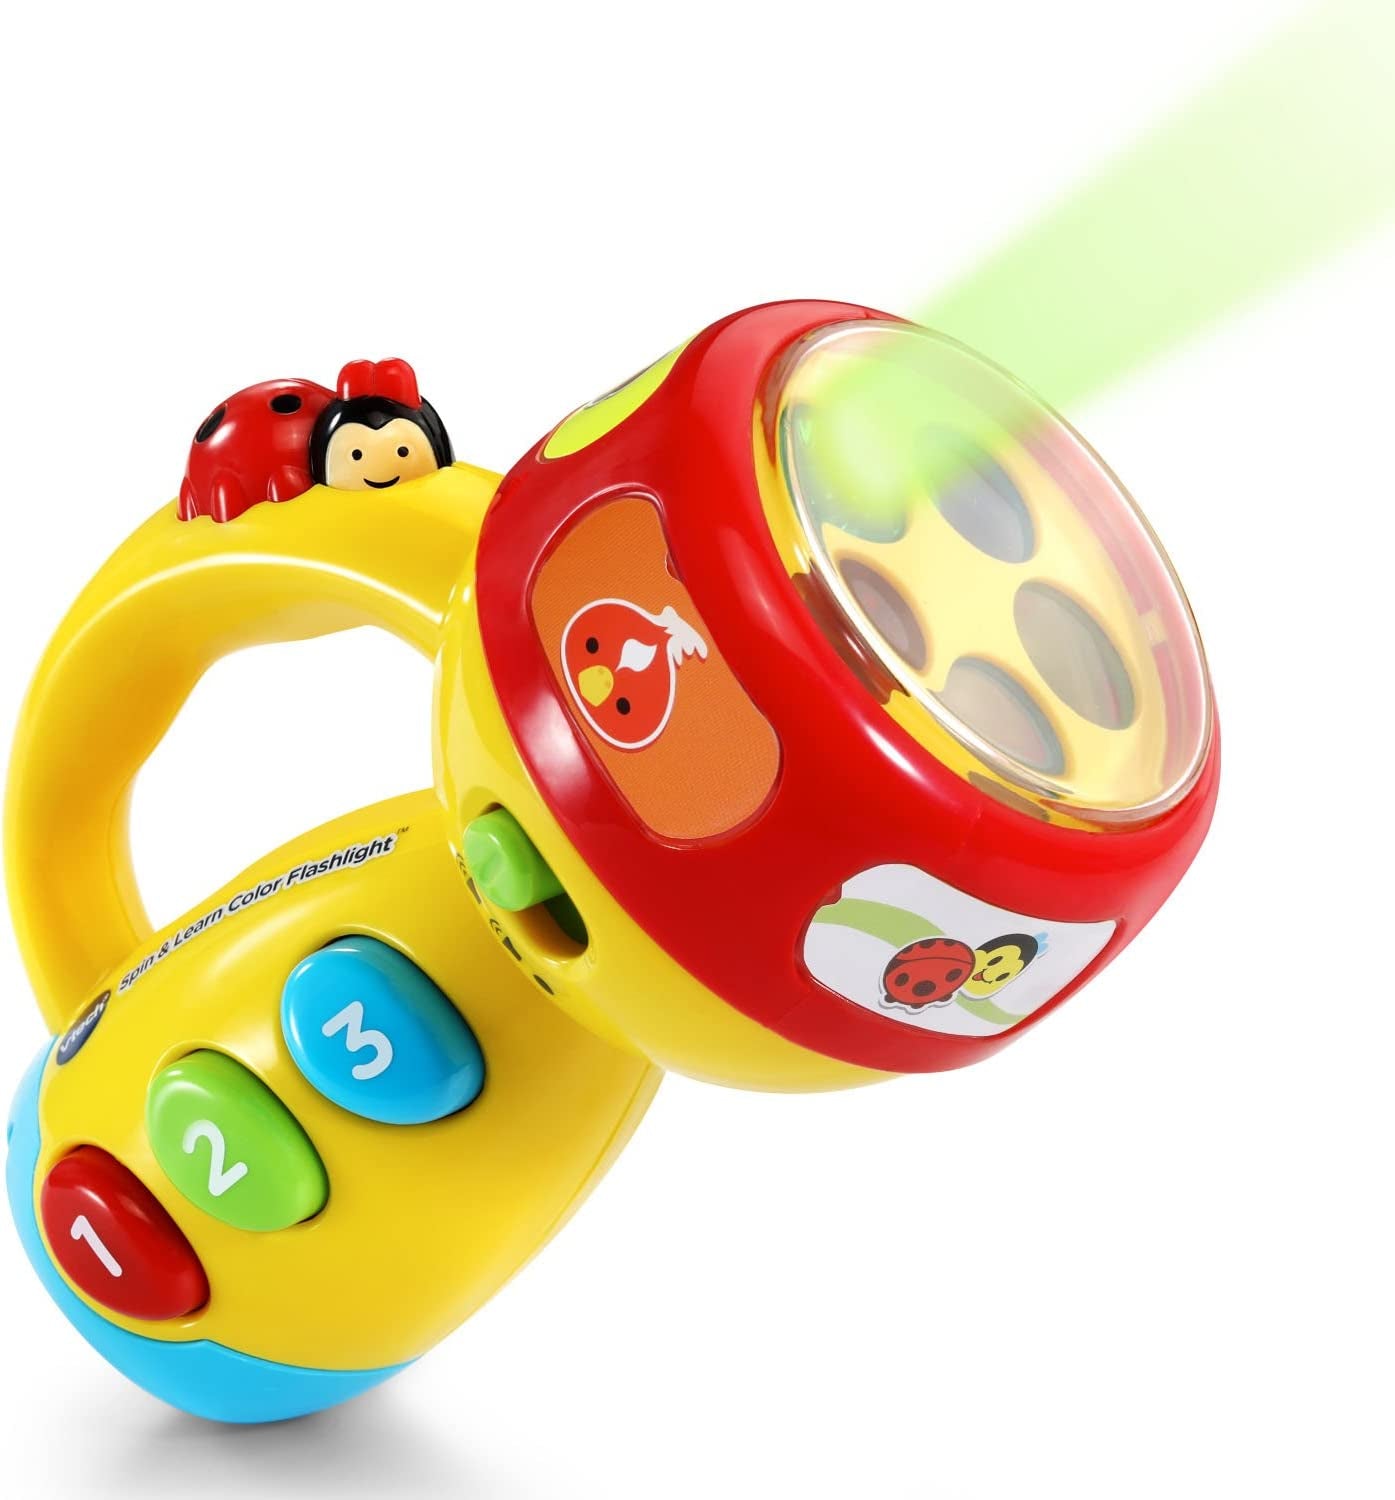 Vtech Spin and Learn Color Flashlight Amazon Exclusive, Lime Green